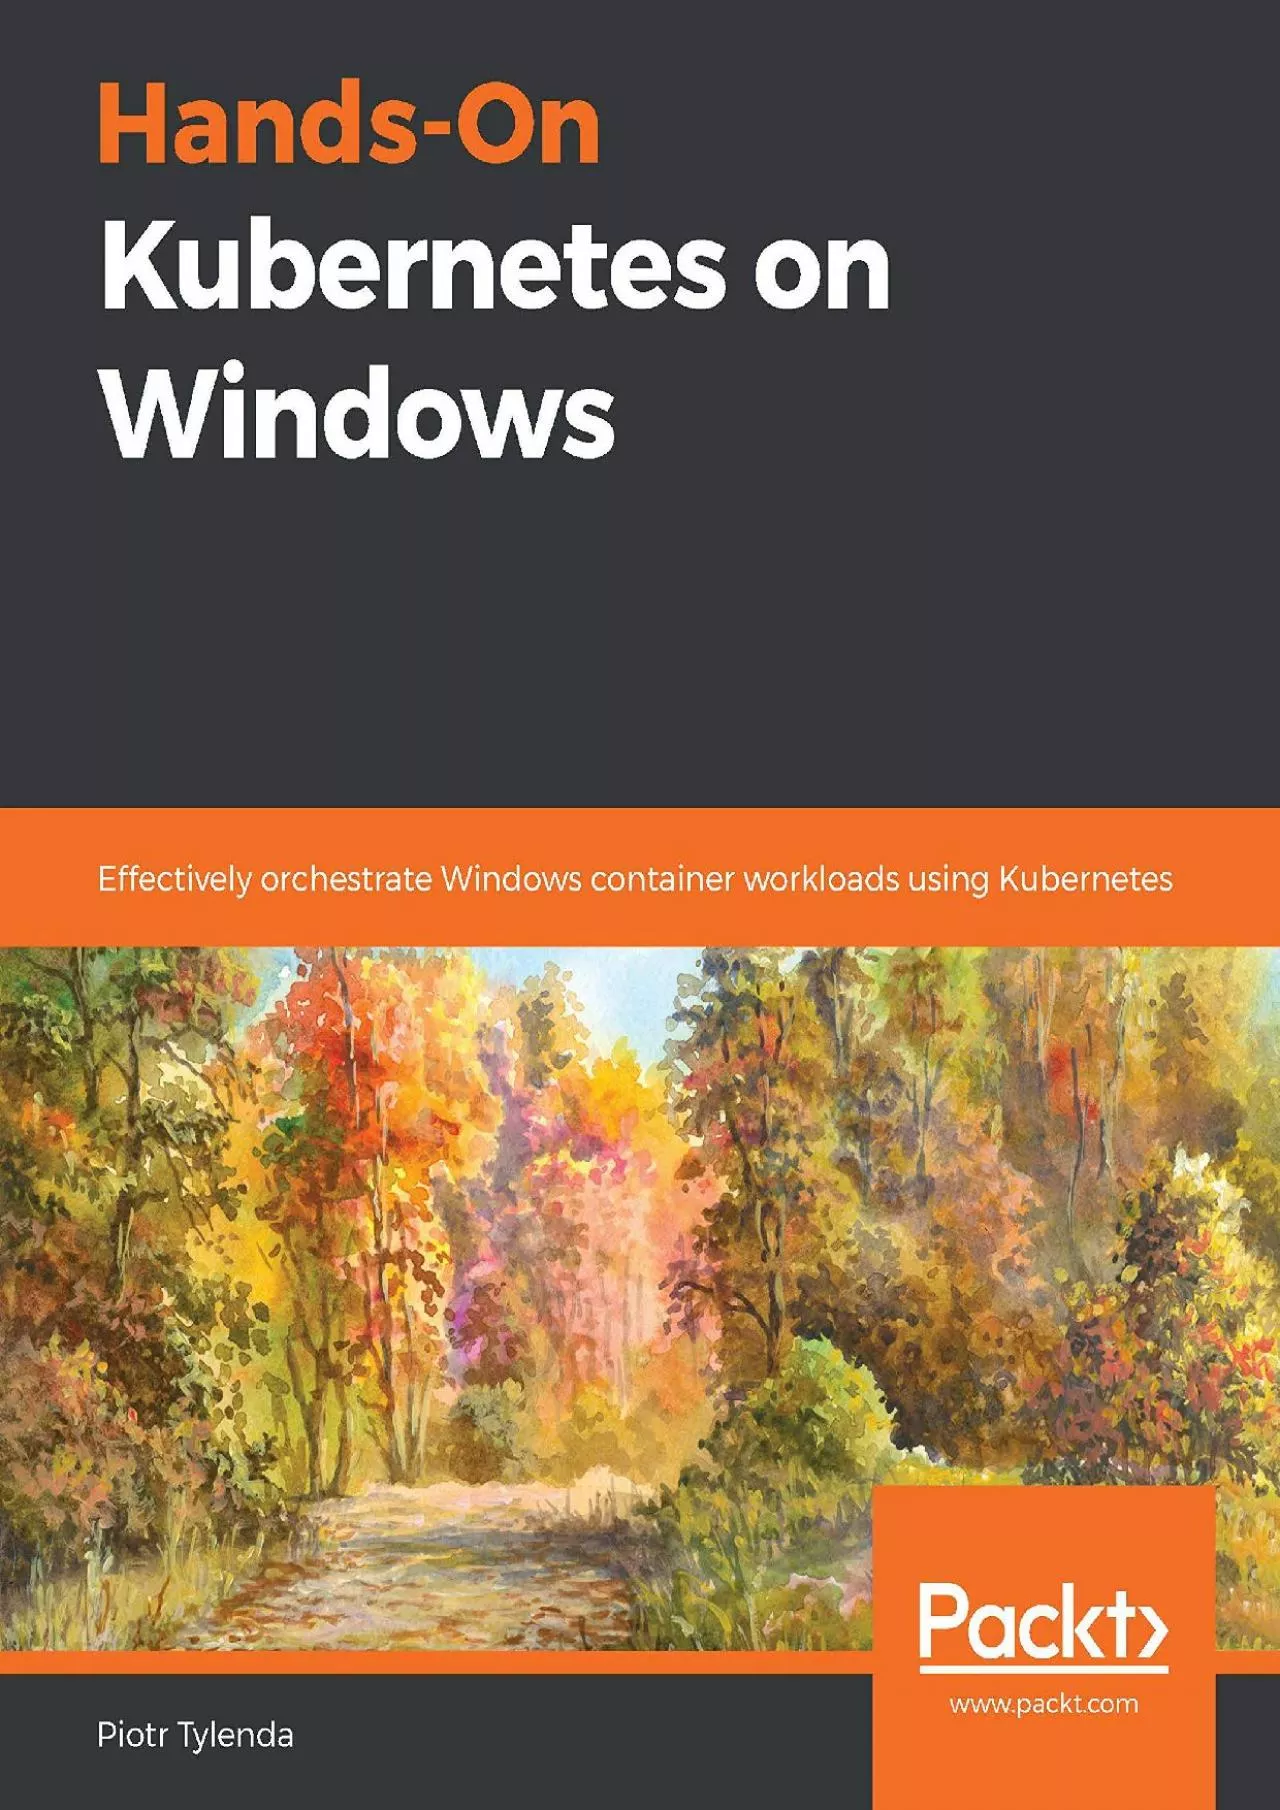 Hands-On Kubernetes on Windows Effectively orchestrate Windows container workloads using